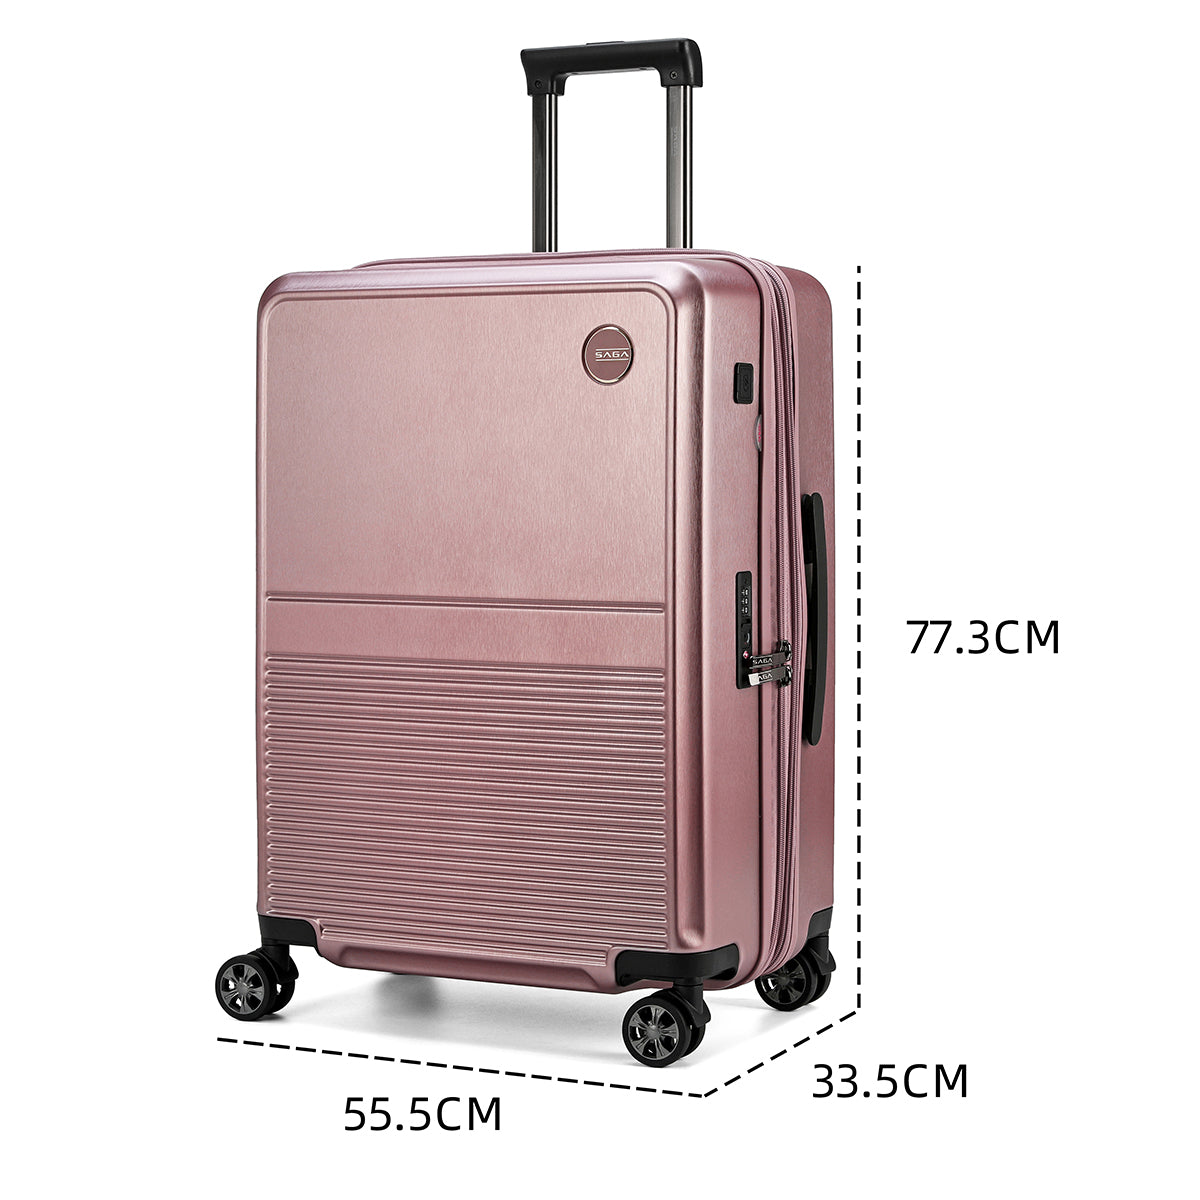 Modern and durable polycarbonate travel bags in several sizes and colors